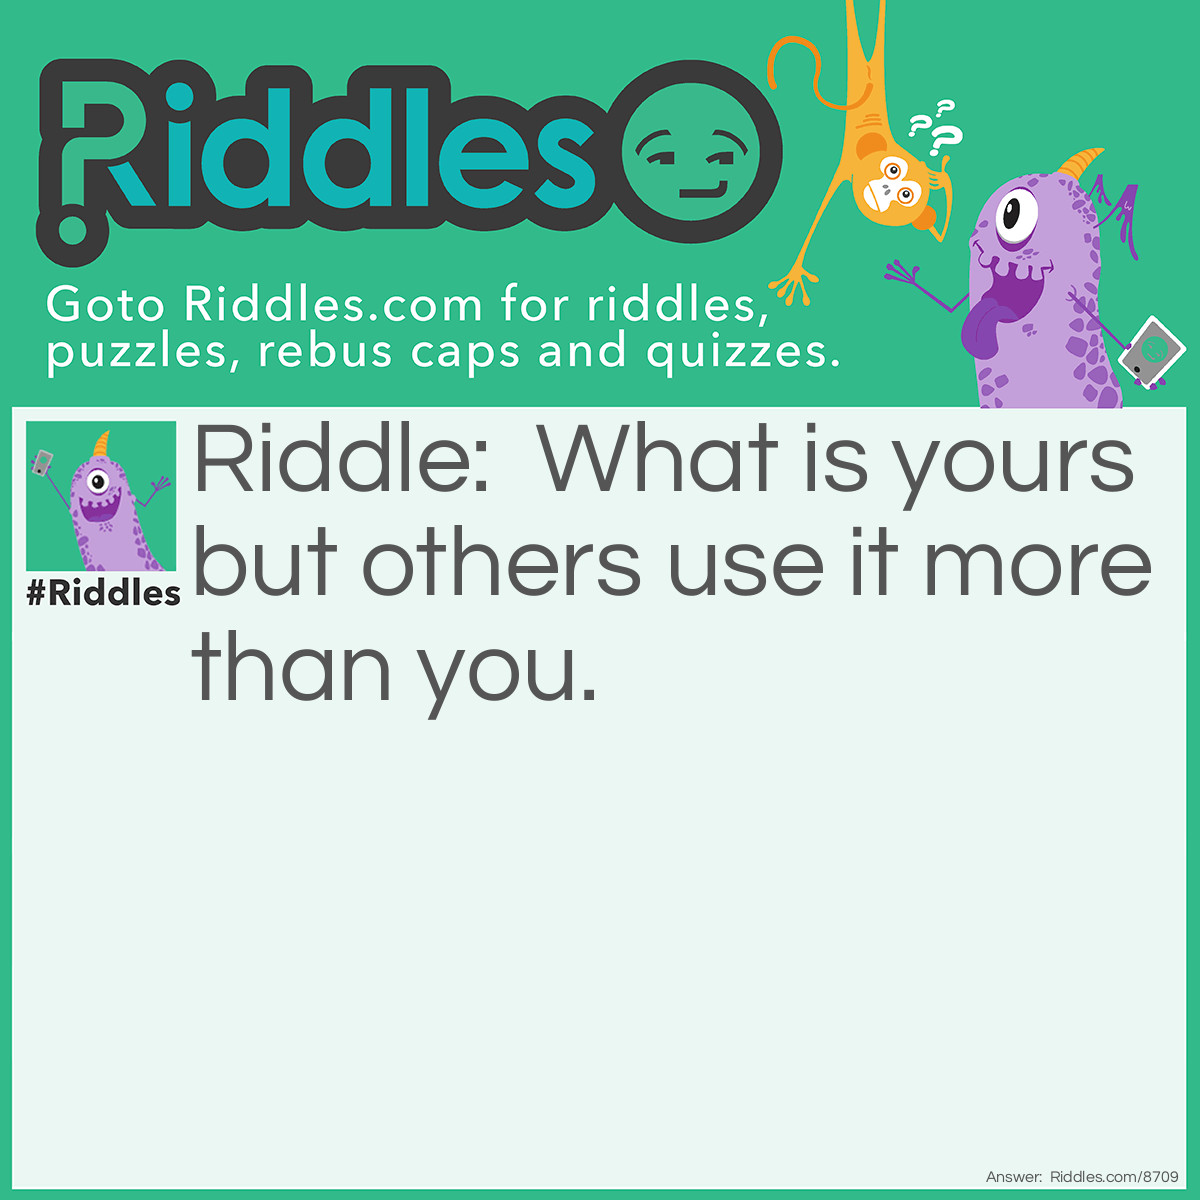 Riddle: What is yours but others use it more than you. Answer: Your name.